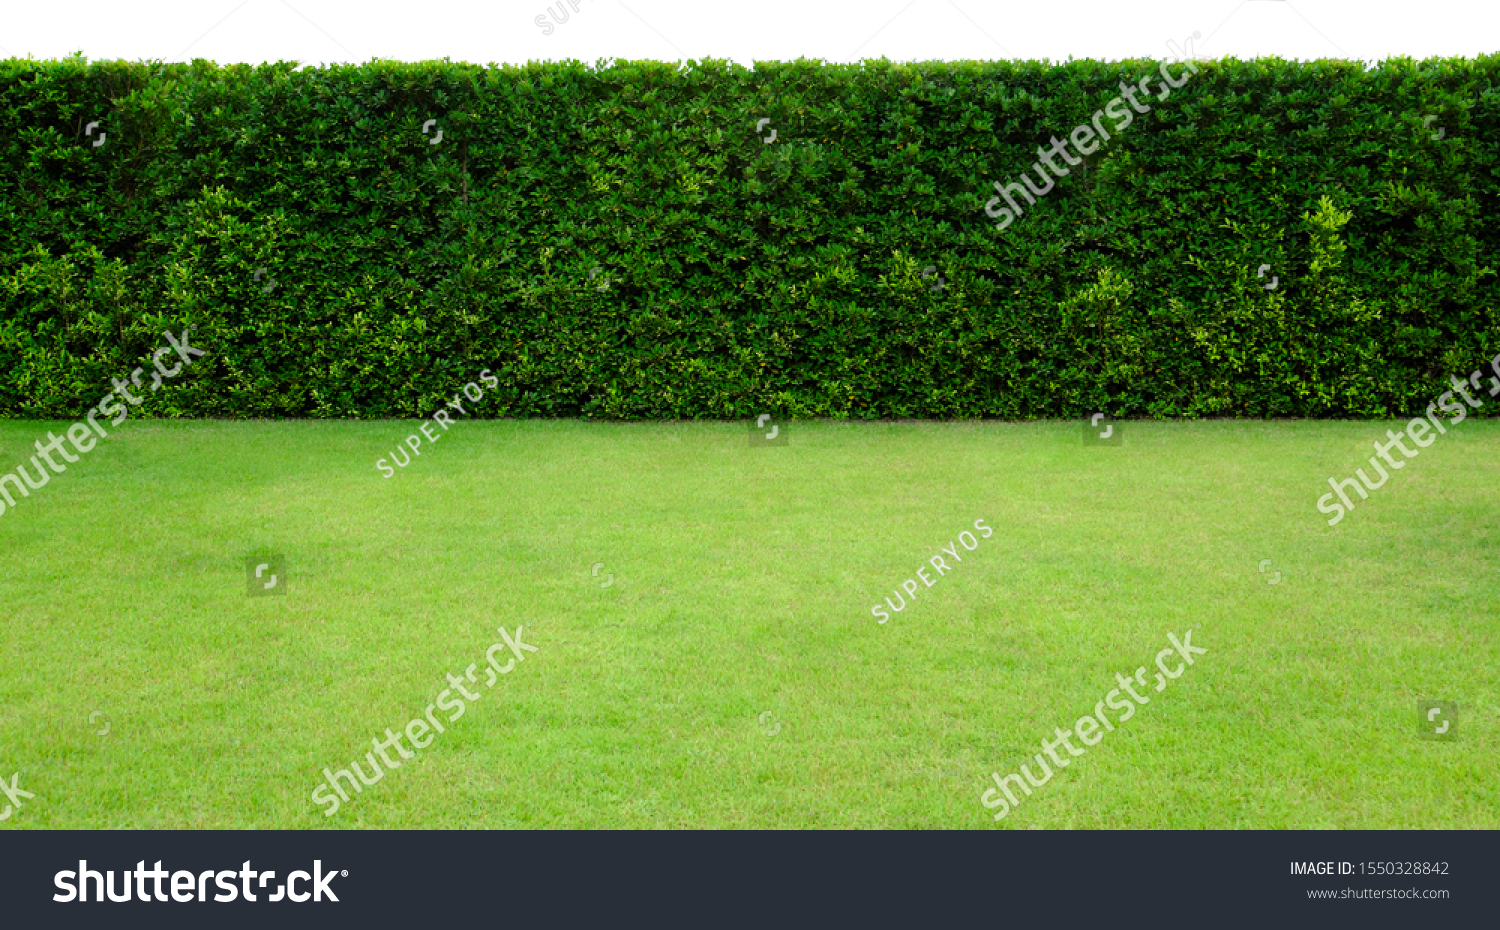 Long tree hedge and green grass lawn. The upper part isolated on white background. #1550328842